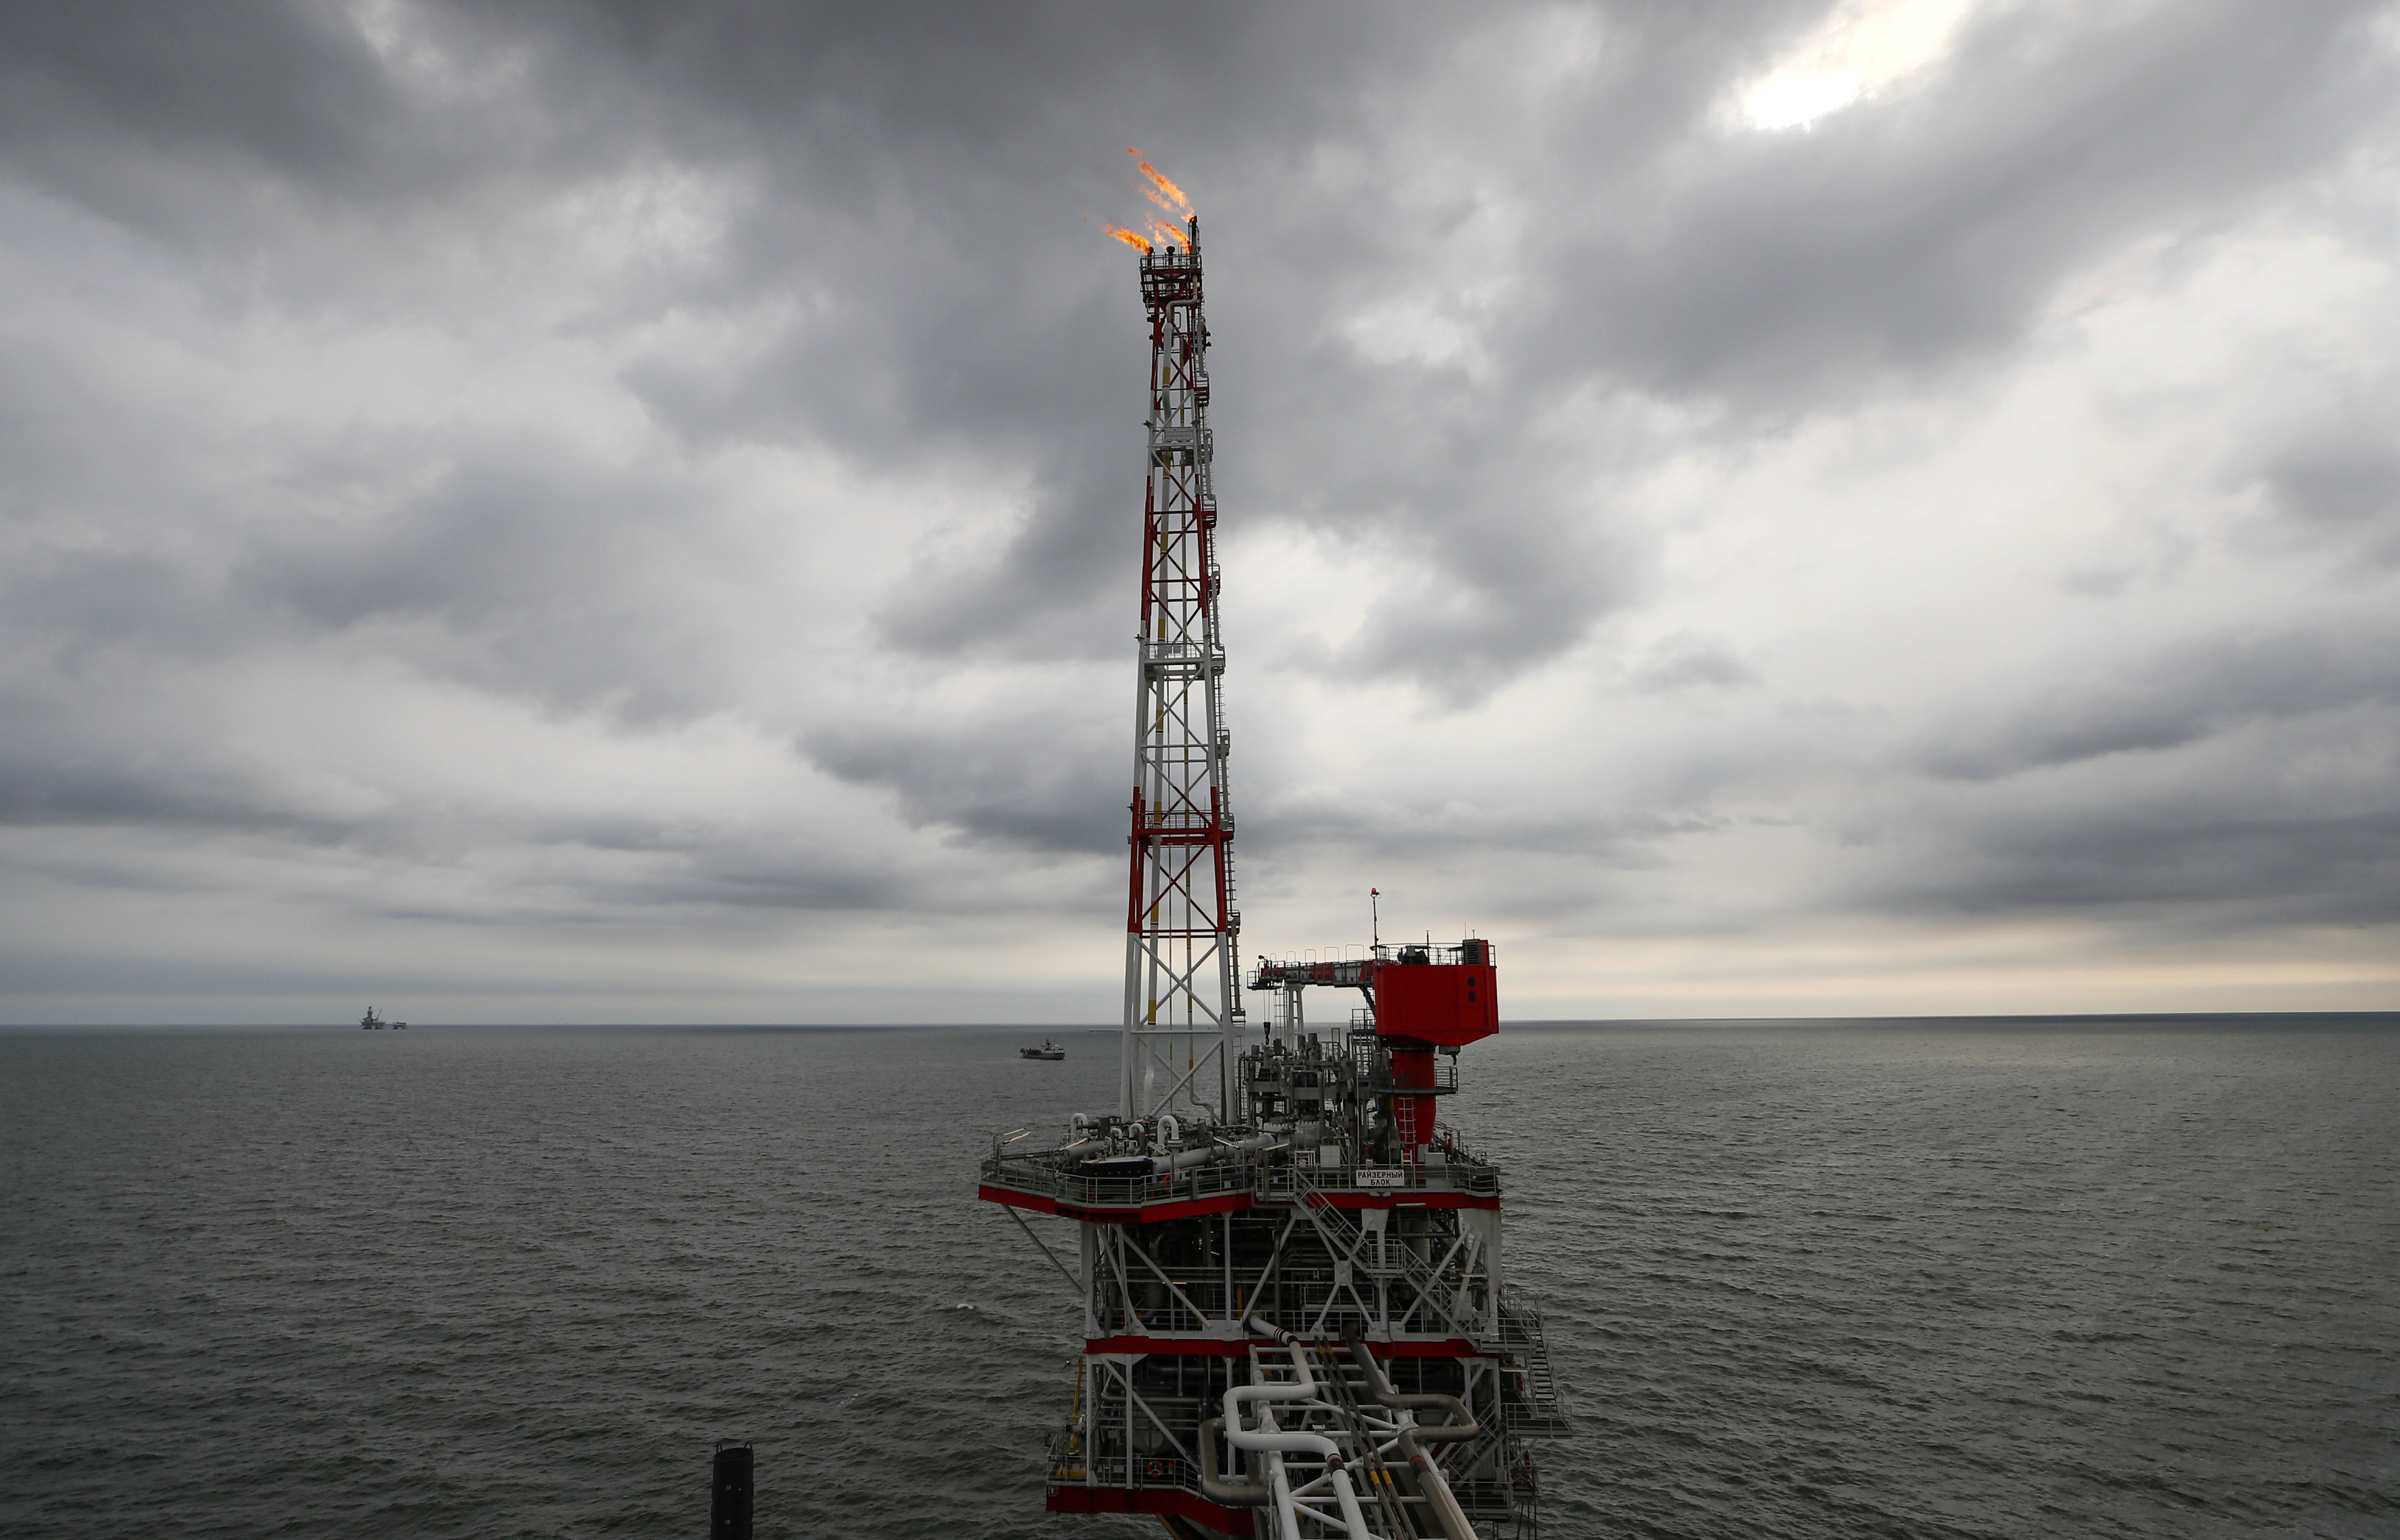 FILE PHOTO: A gas torch is seen at the Filanovskogo oil platform operated by Lukoil company in Caspian Sea